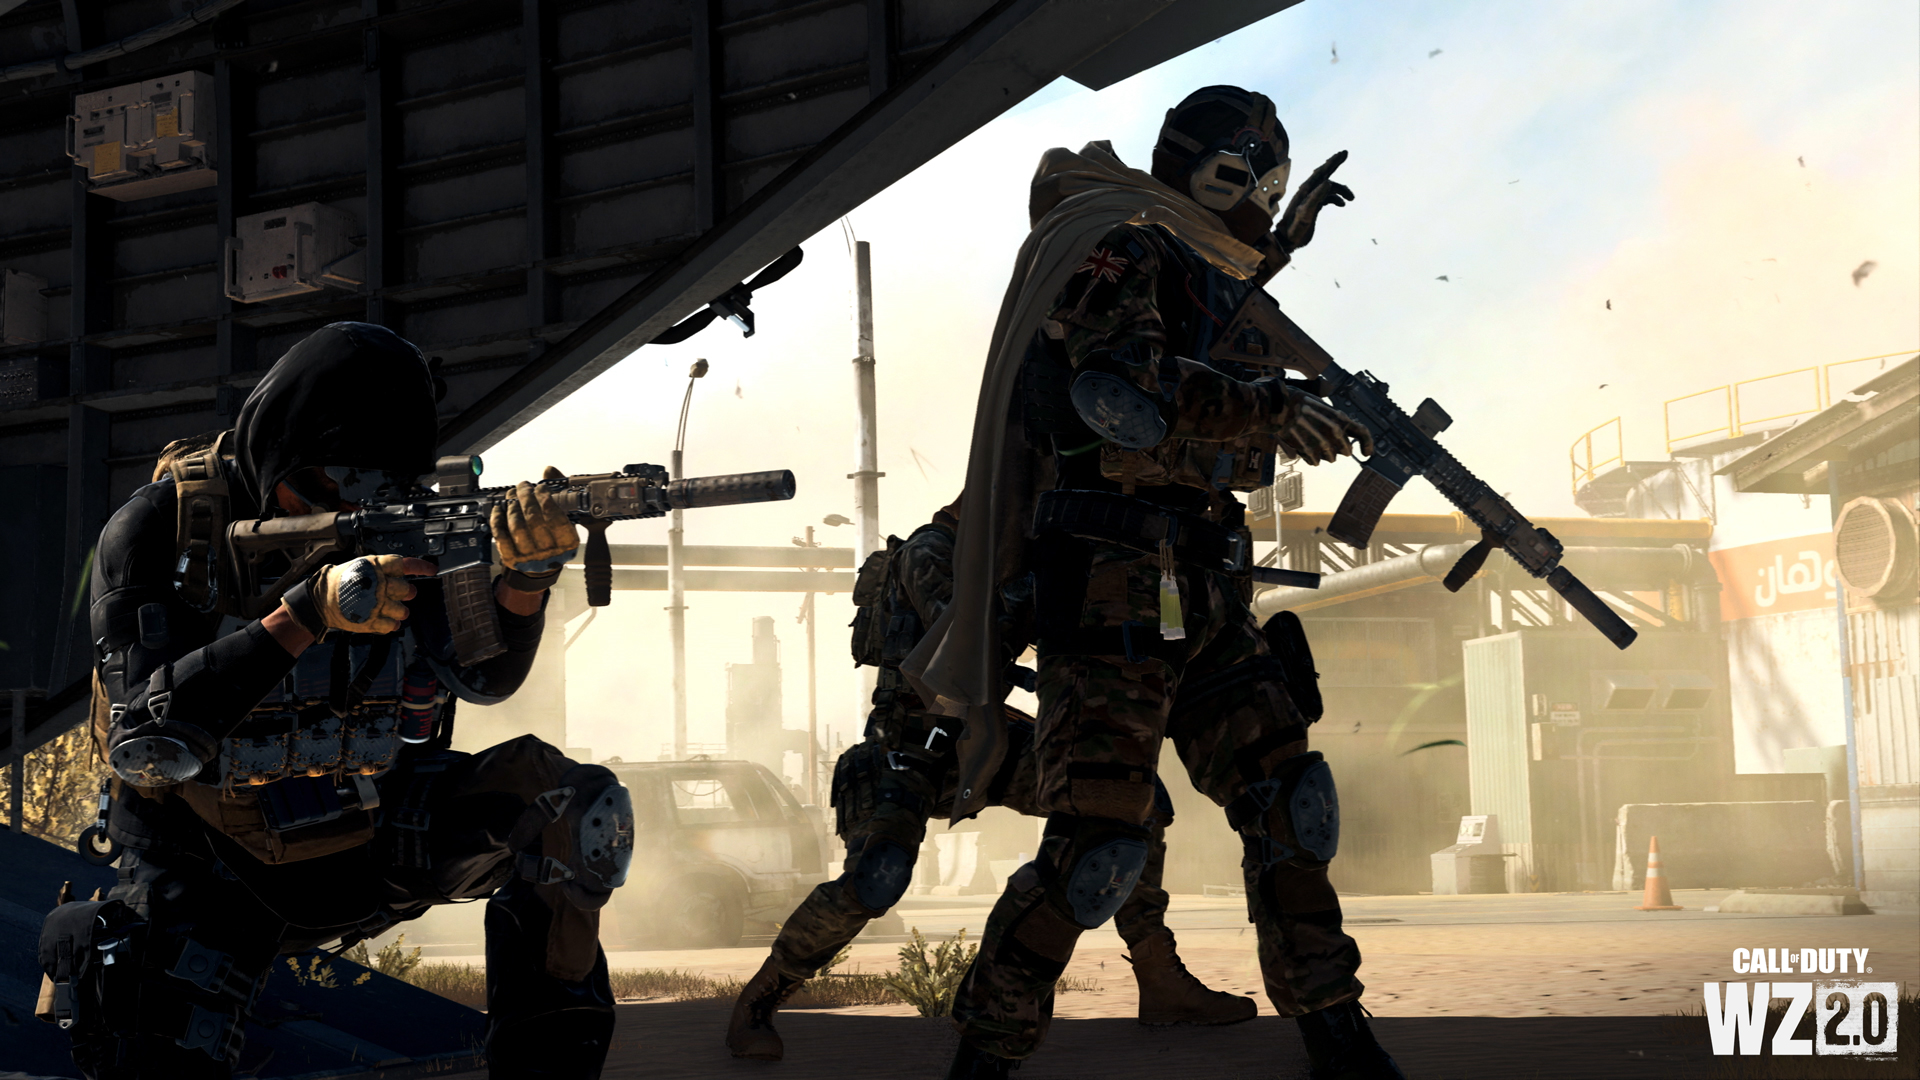 Video Game Call of Duty: Warzone 2.0 HD Wallpaper